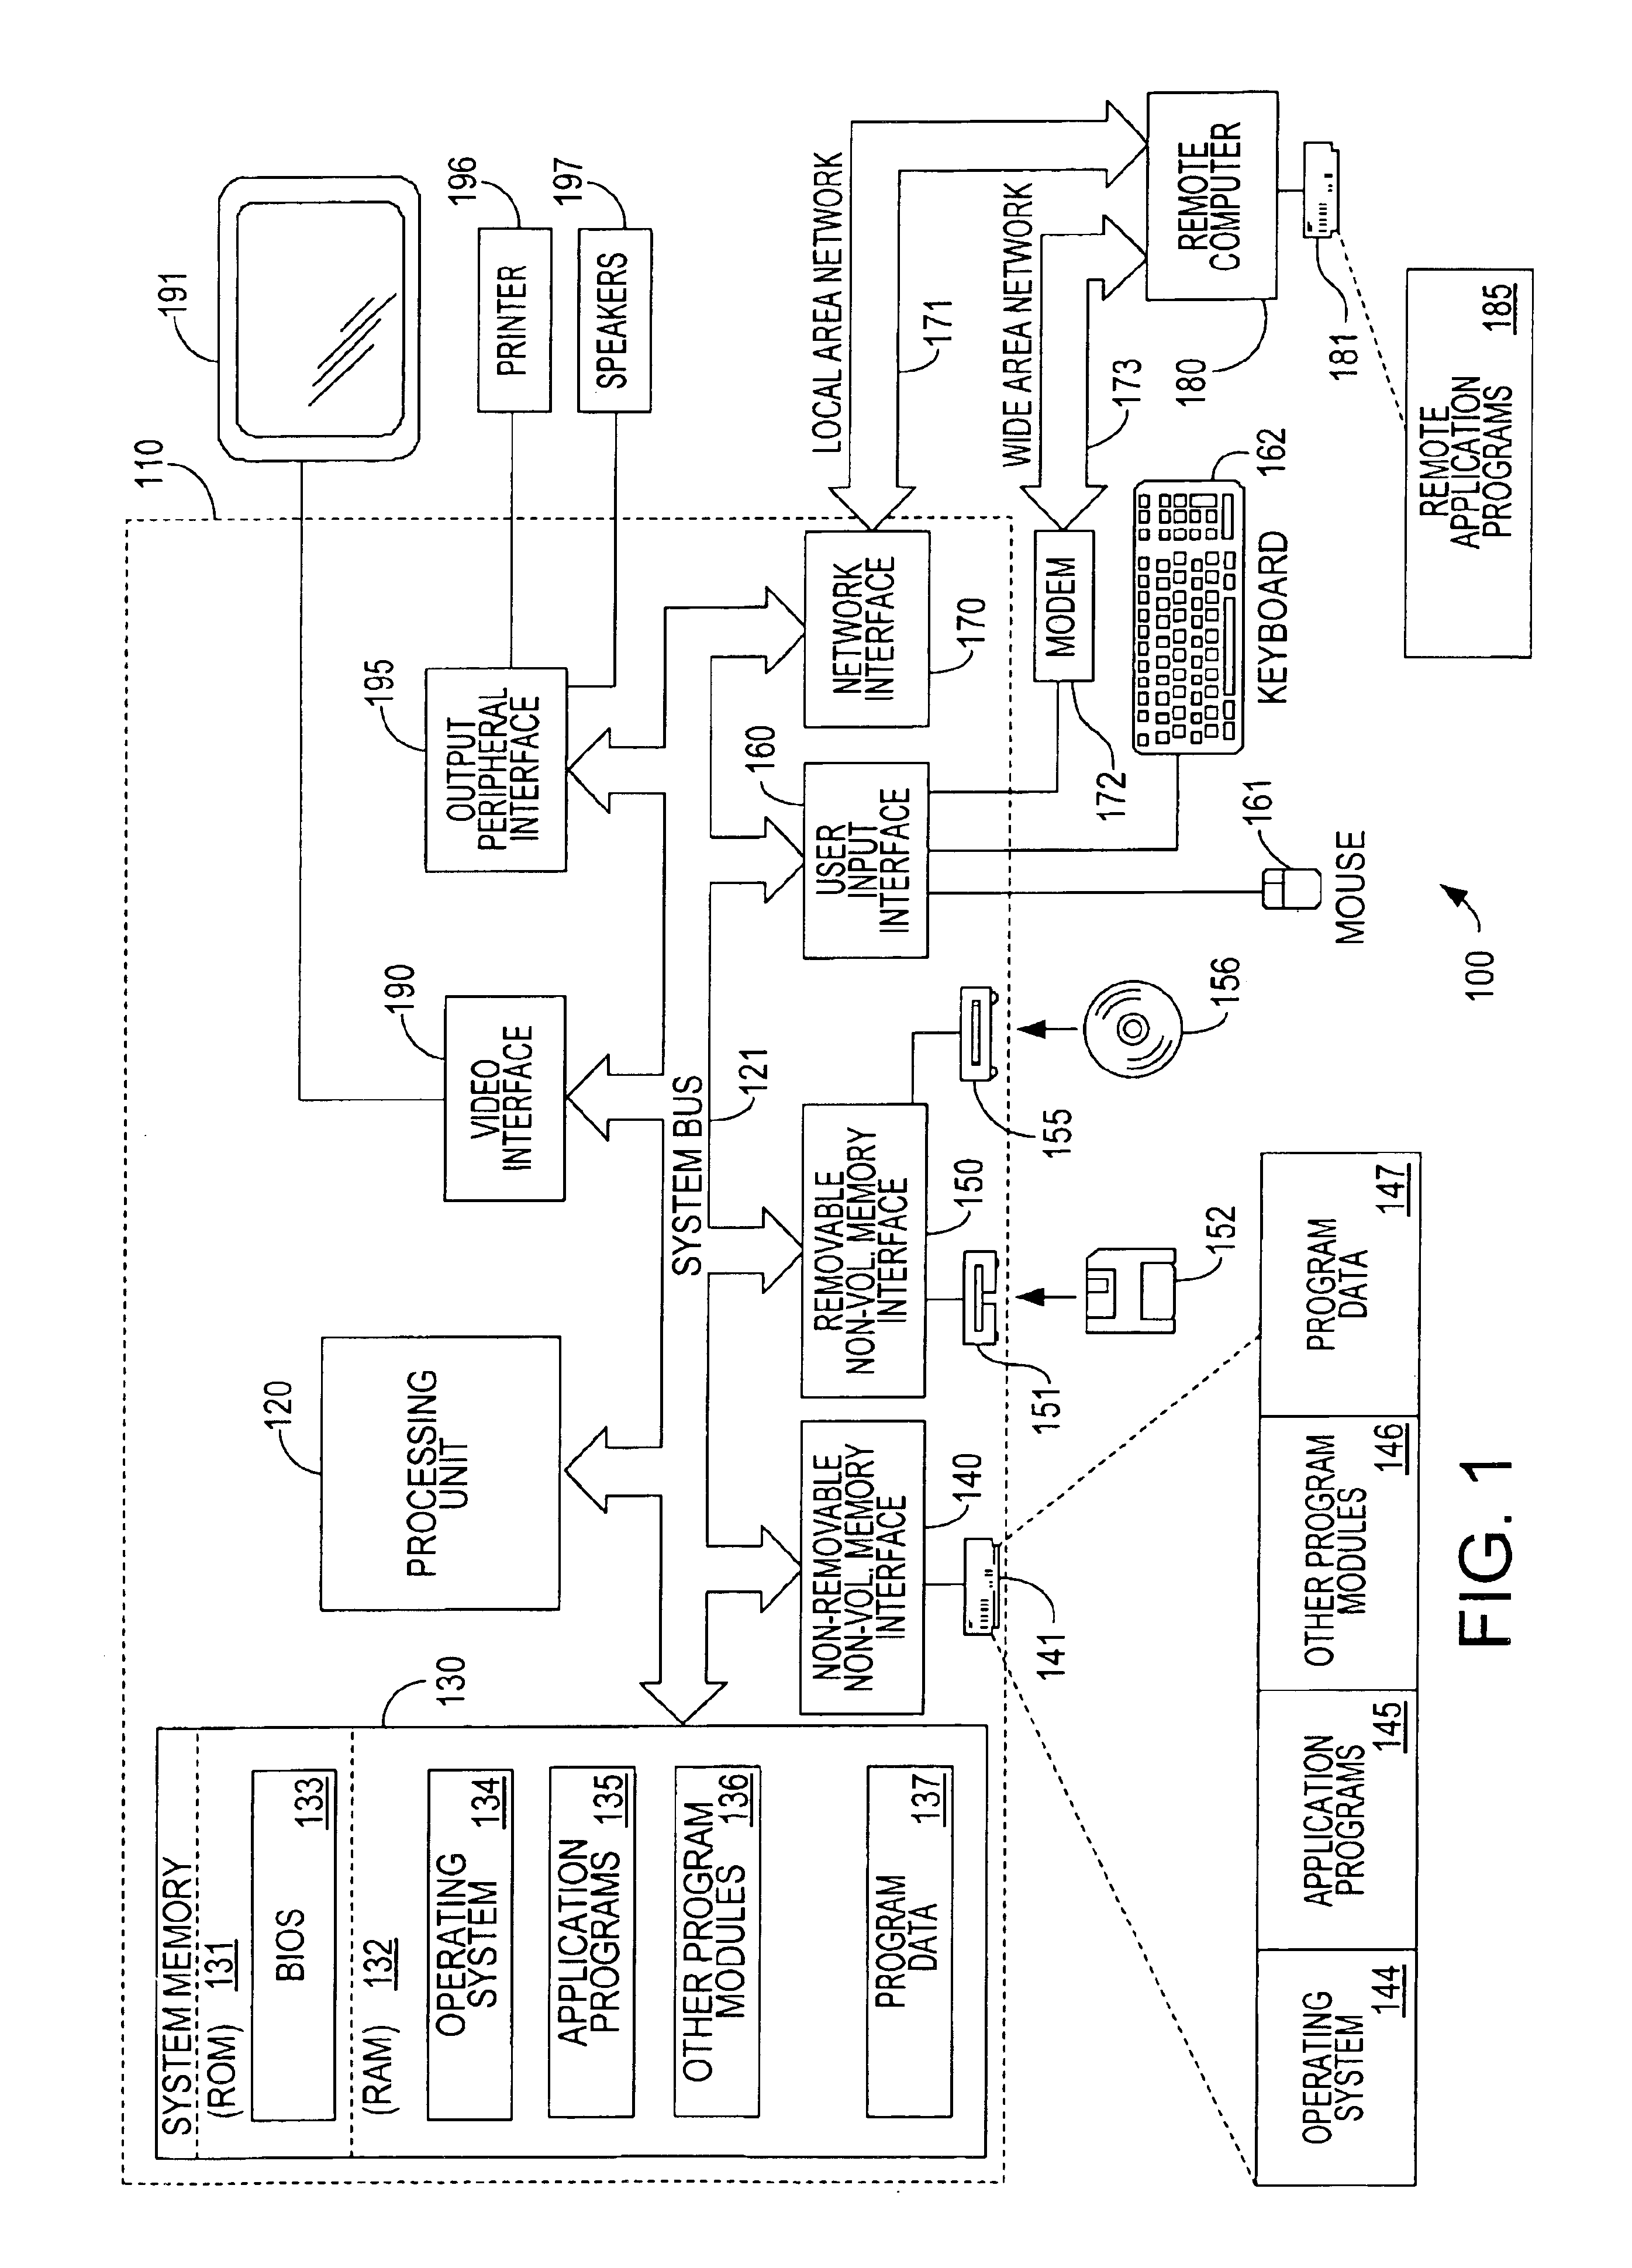 Peer-to-peer name resolution protocol (PNRP) and multilevel cache for use therewith